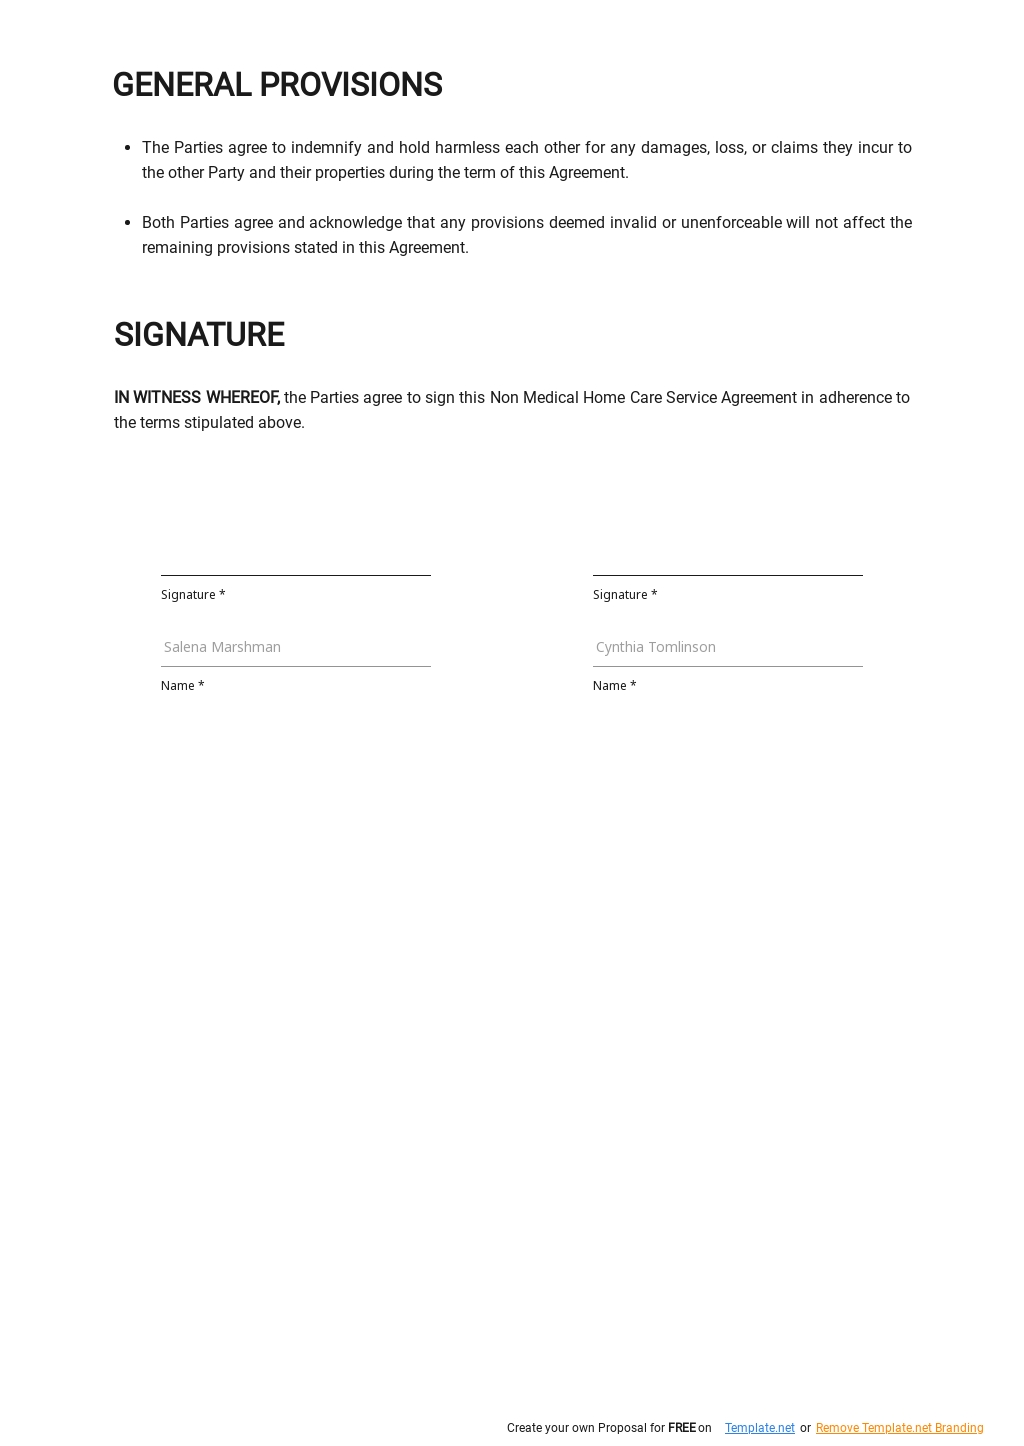 Non Medical Home Care Service Agreement Template 2.jpe